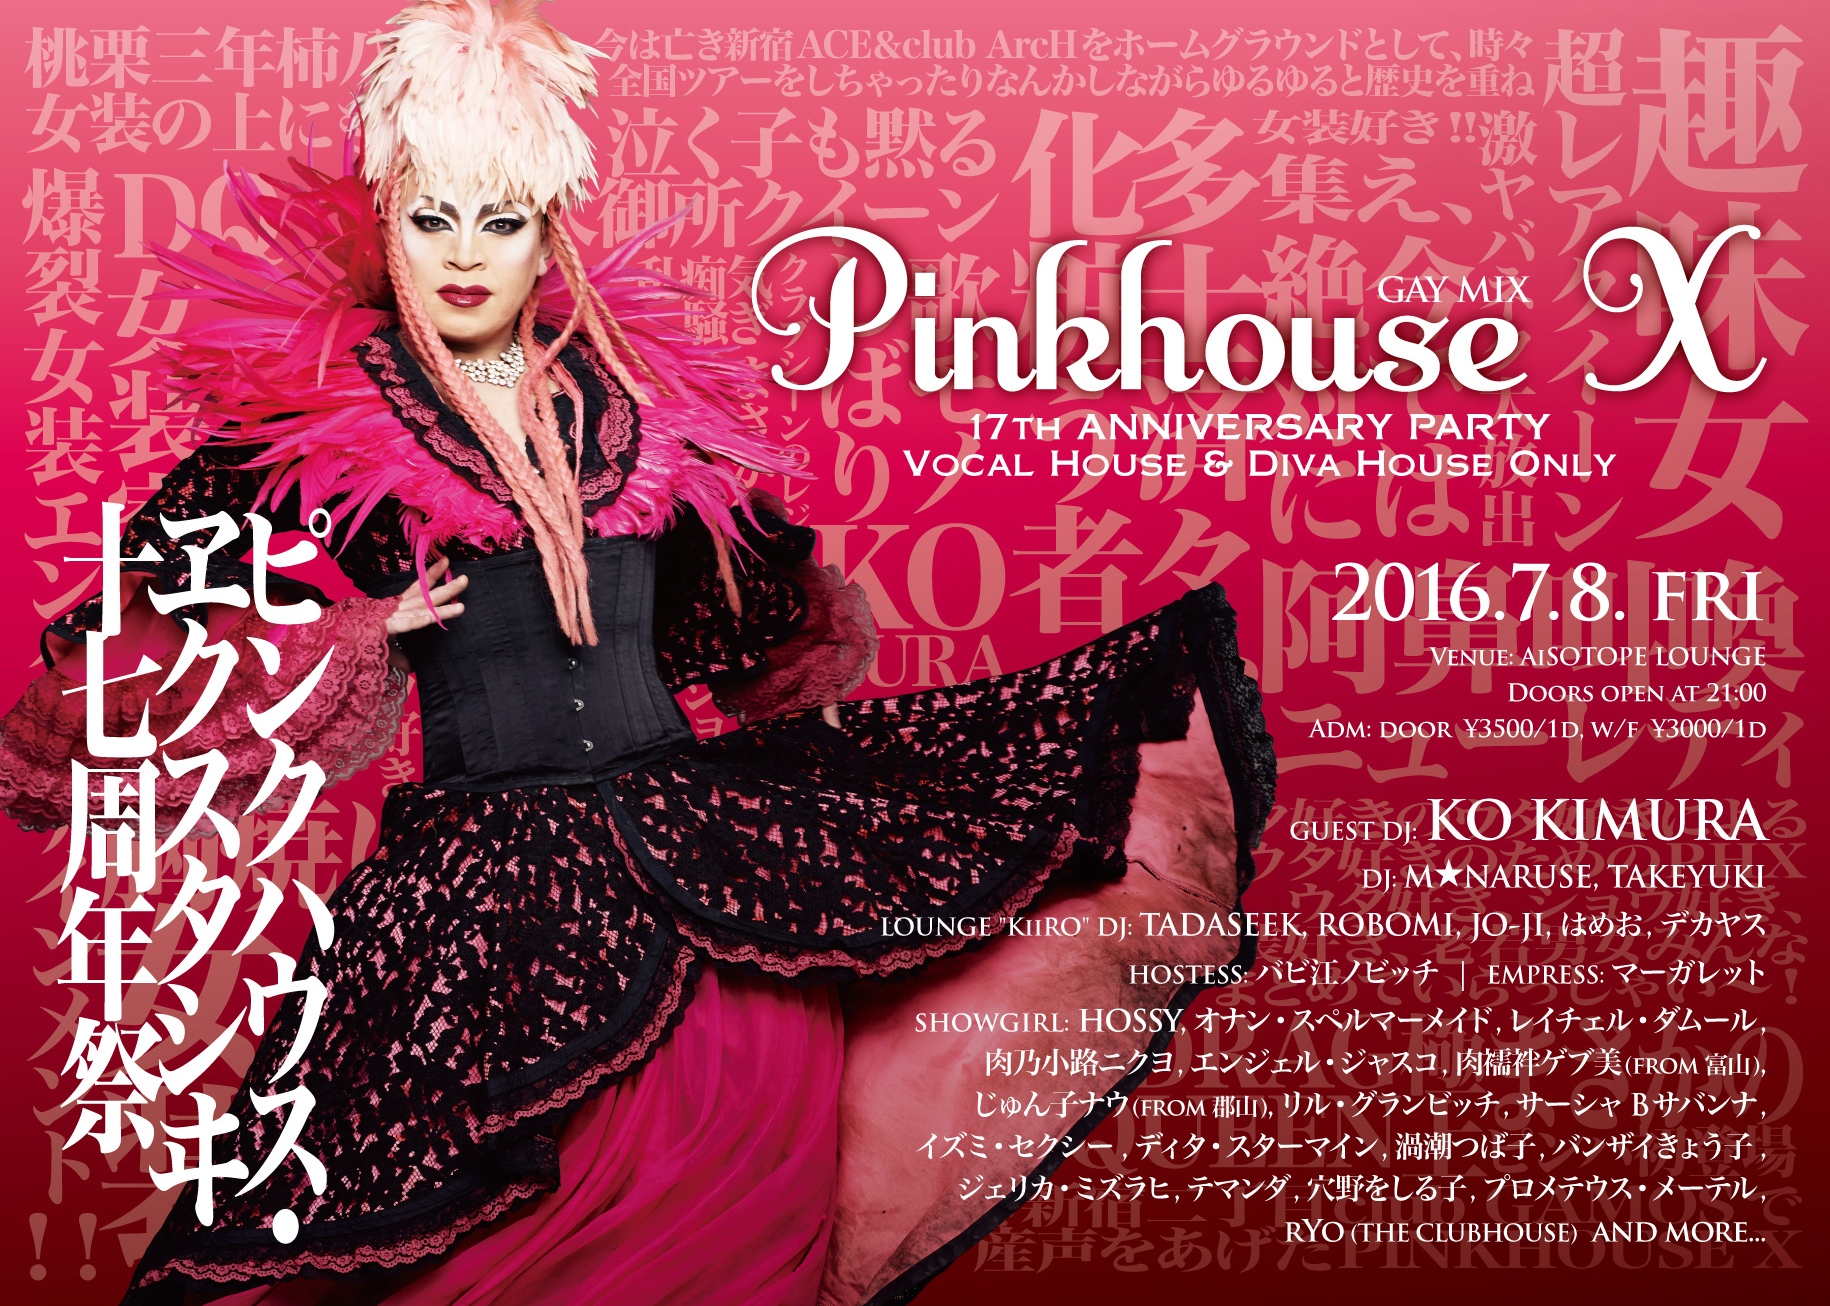 PINKHOUSE X 　17th ANNIVERSARY PARTY